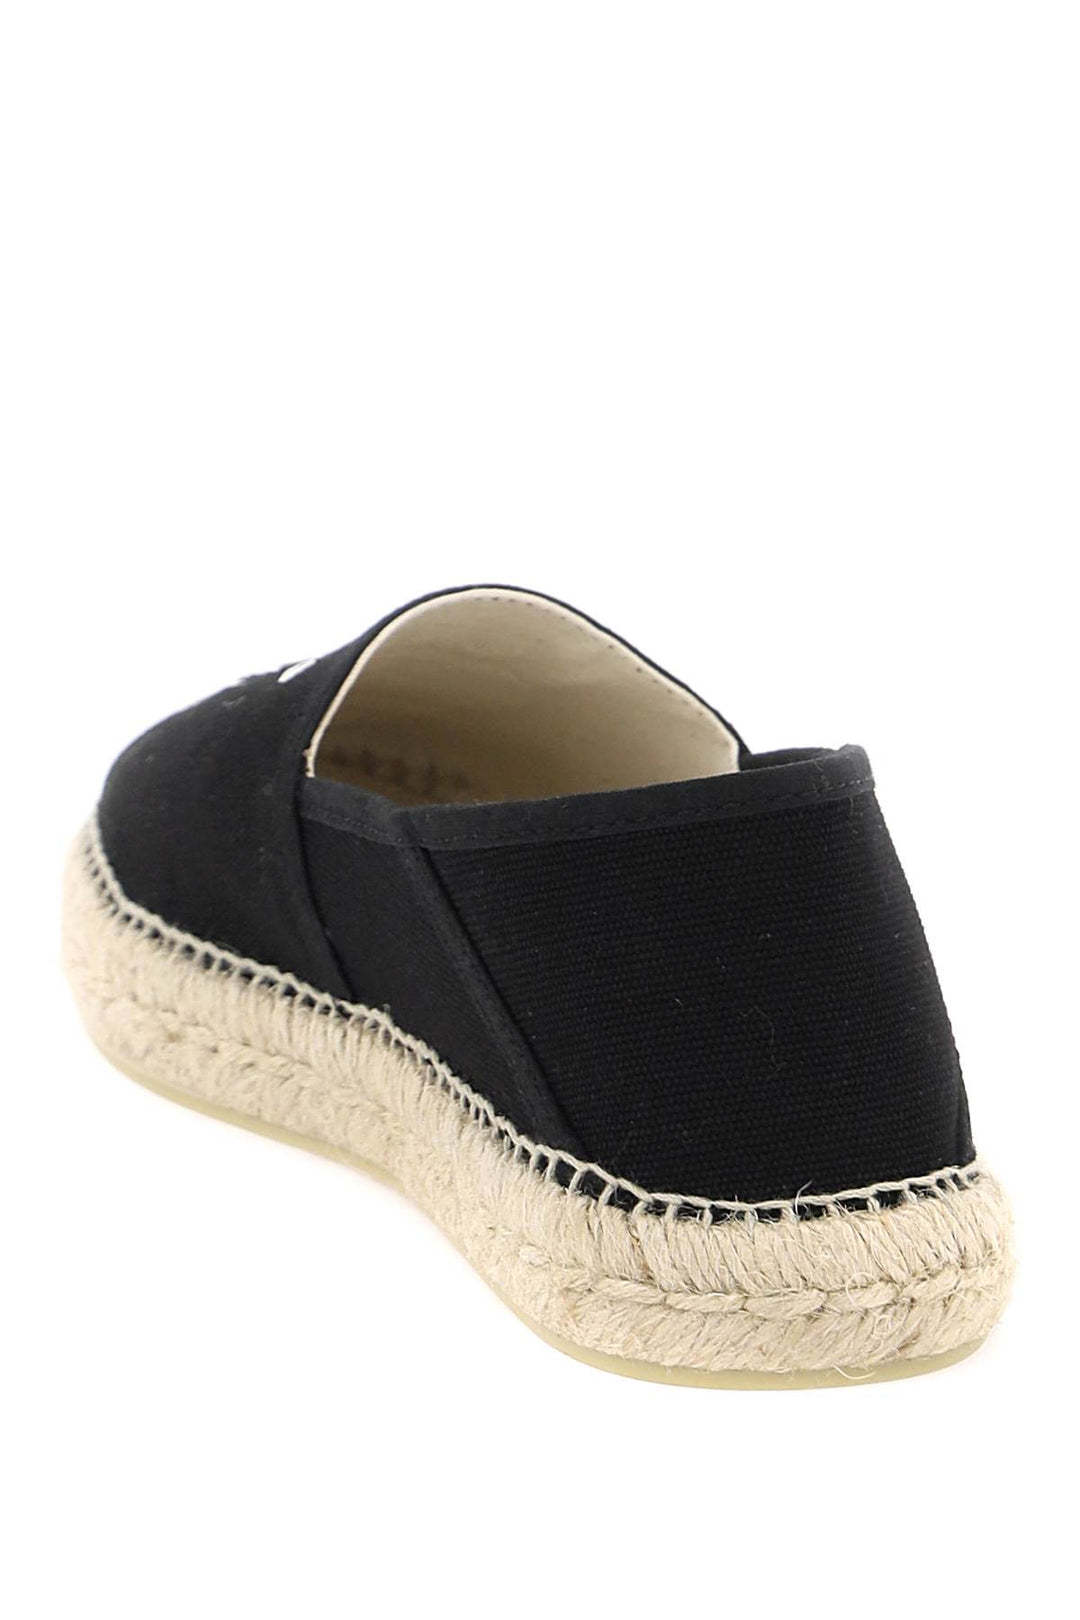 Kenzo Canvas Espadrilles With Logo Embroidery   Black